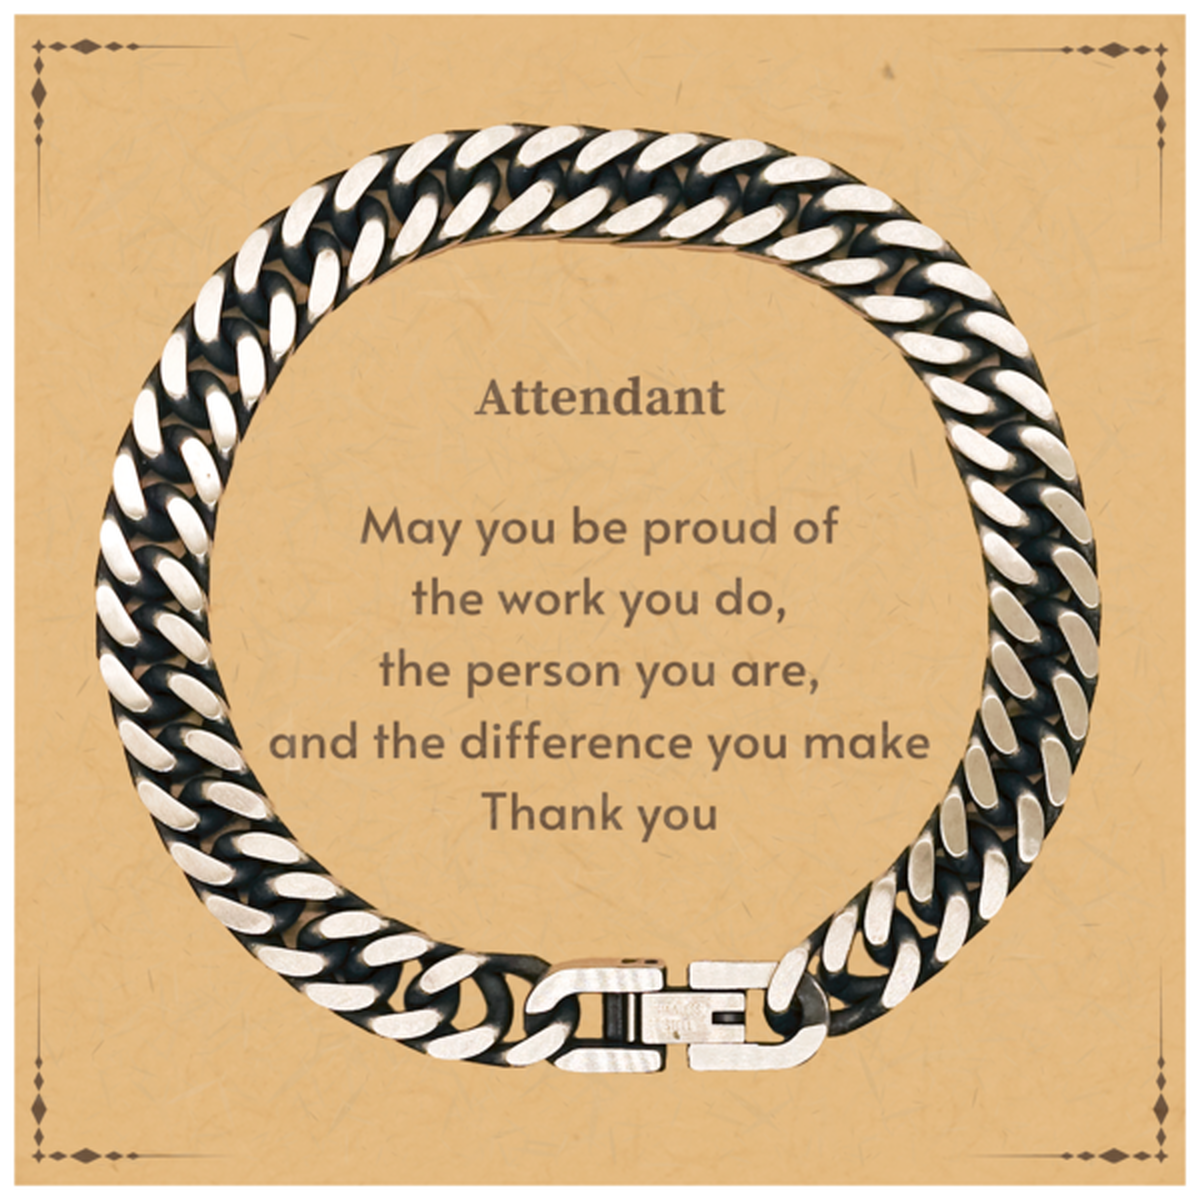 Heartwarming Cuban Link Chain Bracelet Retirement Coworkers Gifts for Attendant, Attendant May You be proud of the work you do, the person you are Gifts for Boss Men Women Friends